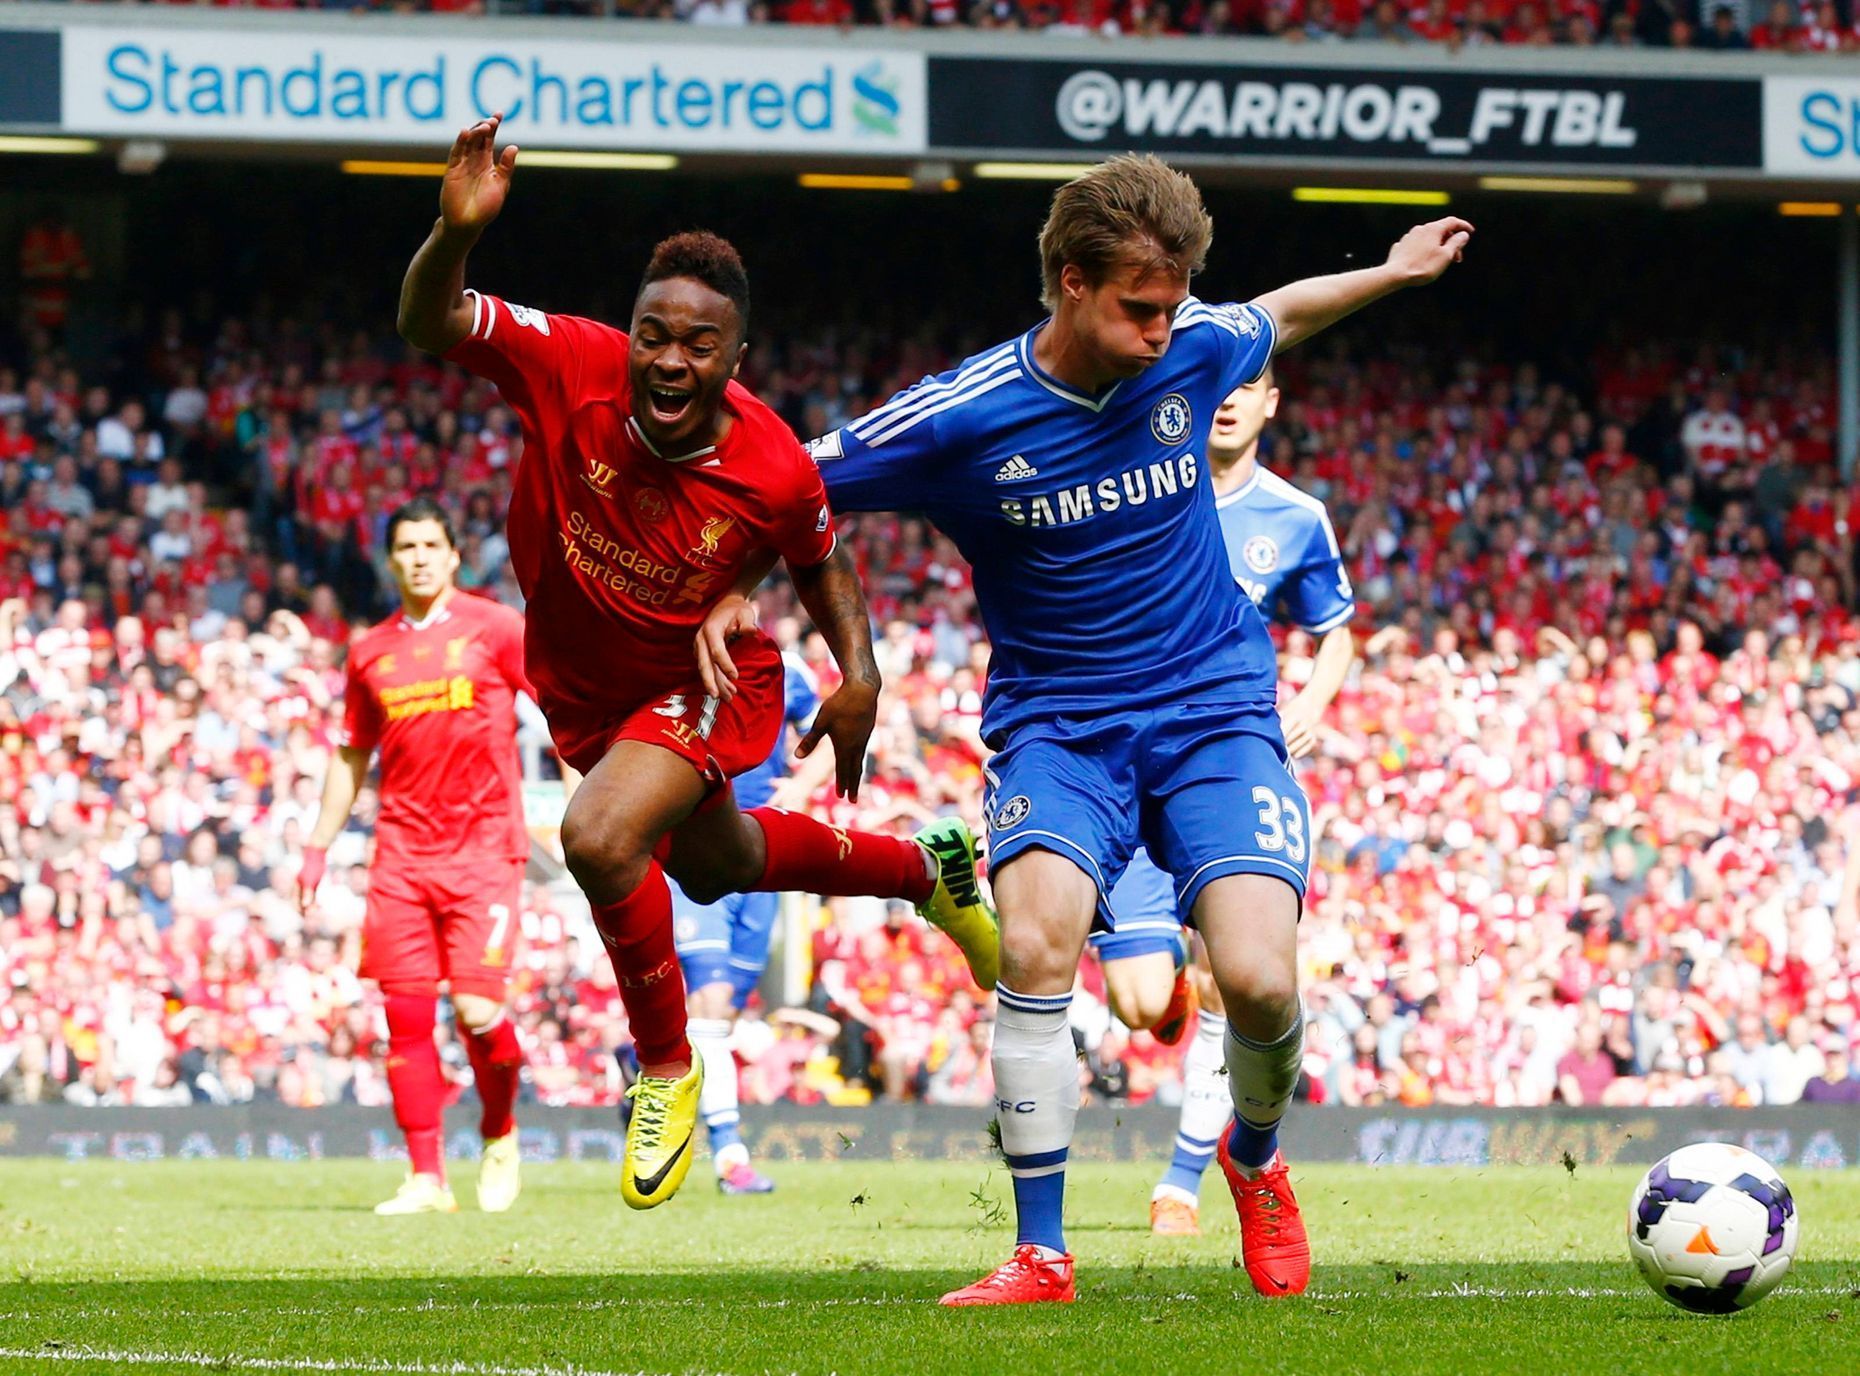 Chelsea's Kalas challenges Liverpool's Sterling during their English Premier League soccer match at Anfield in Liverpool